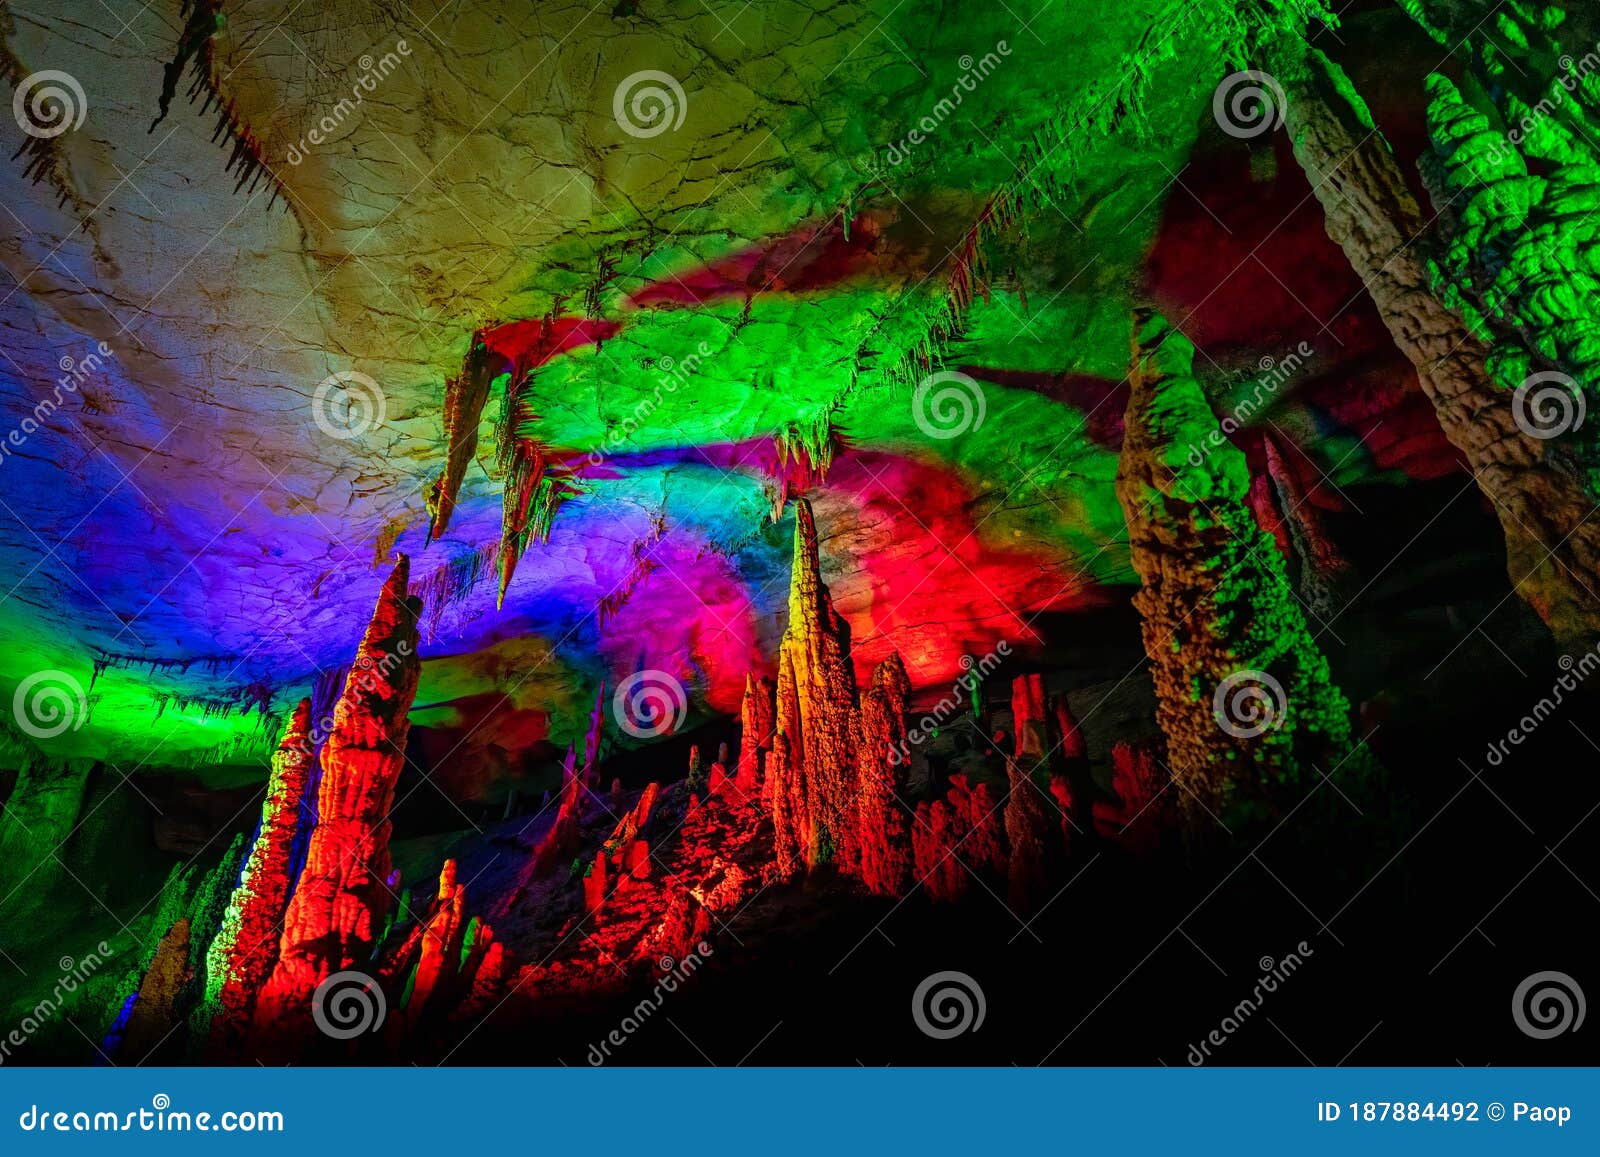 Stunning Huanglong Yellow Dragon Cave Stock Photo Image Of Colourful